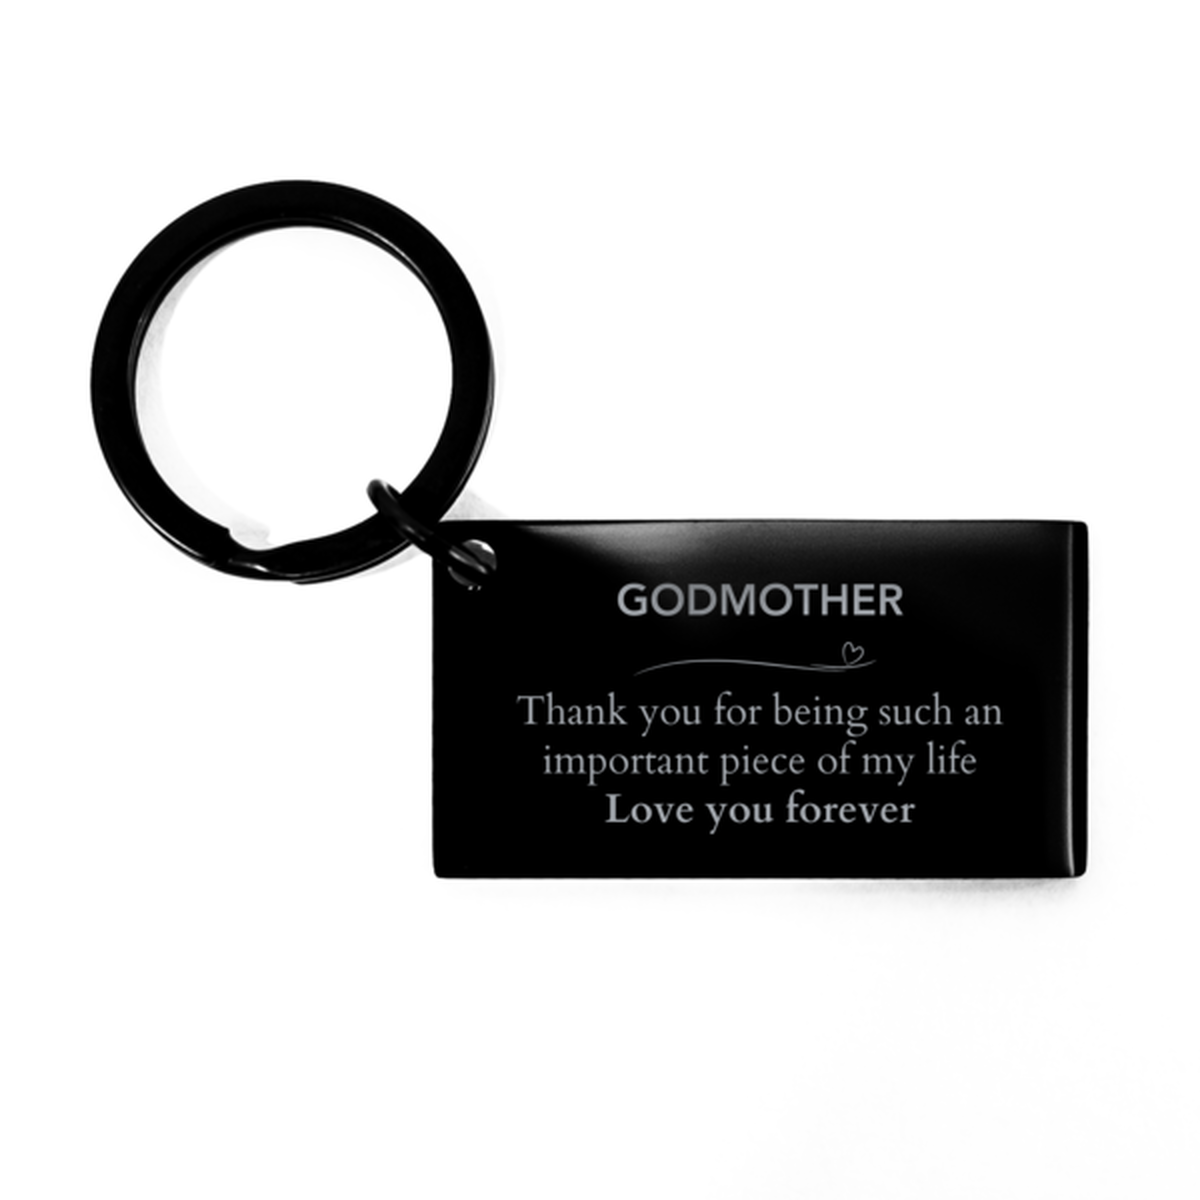 Appropriate Godmother Keychain Epic Birthday Gifts for Godmother Thank you for being such an important piece of my life Godmother Christmas Mothers Fathers Day